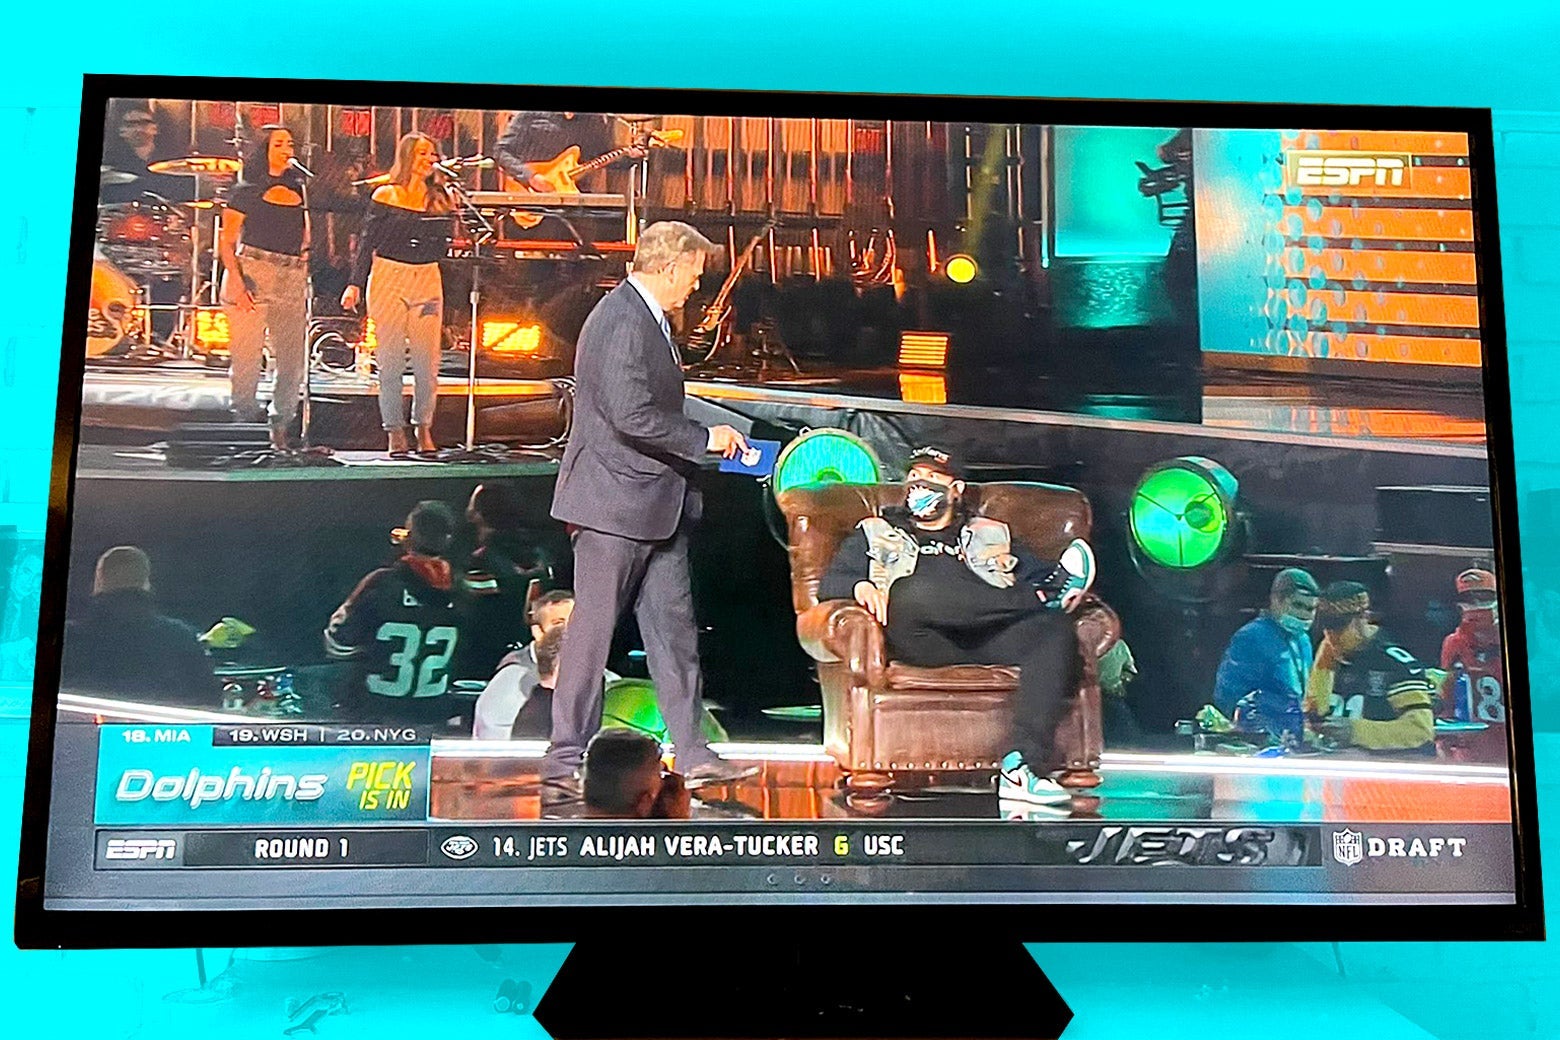 Goodell stands next to Smith, sitting in his chair, at the NFL Draft on flat-screen television